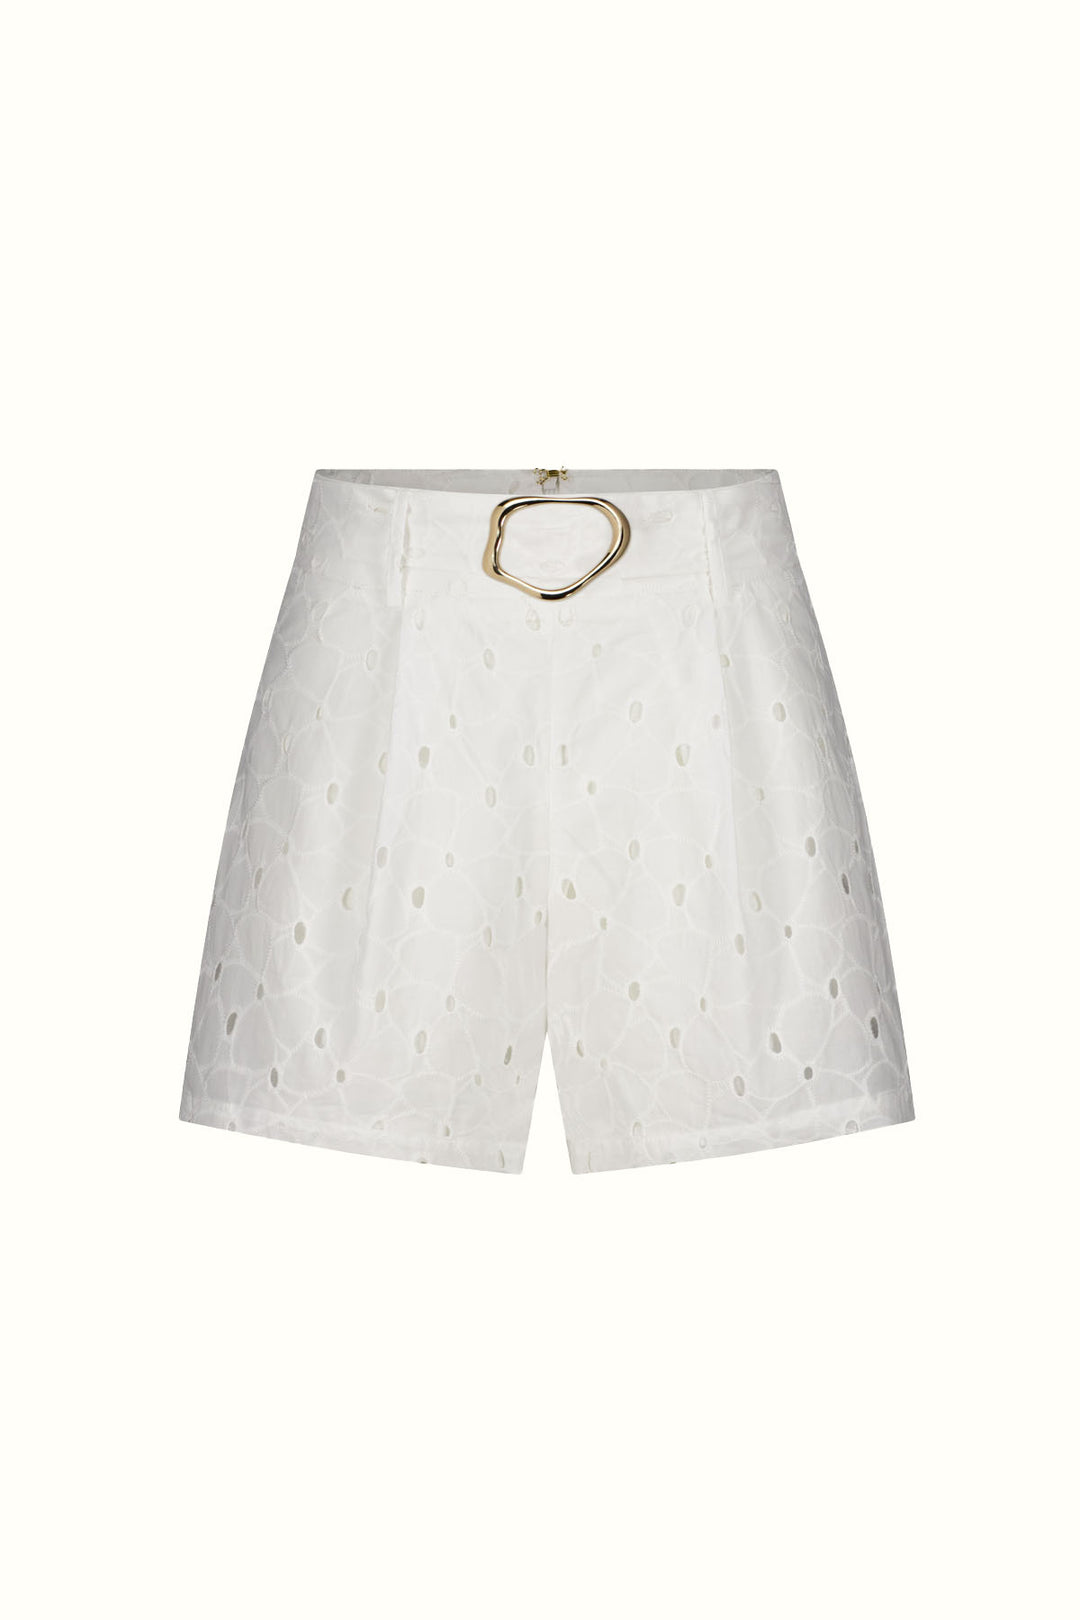 The Perfectionist Shorts